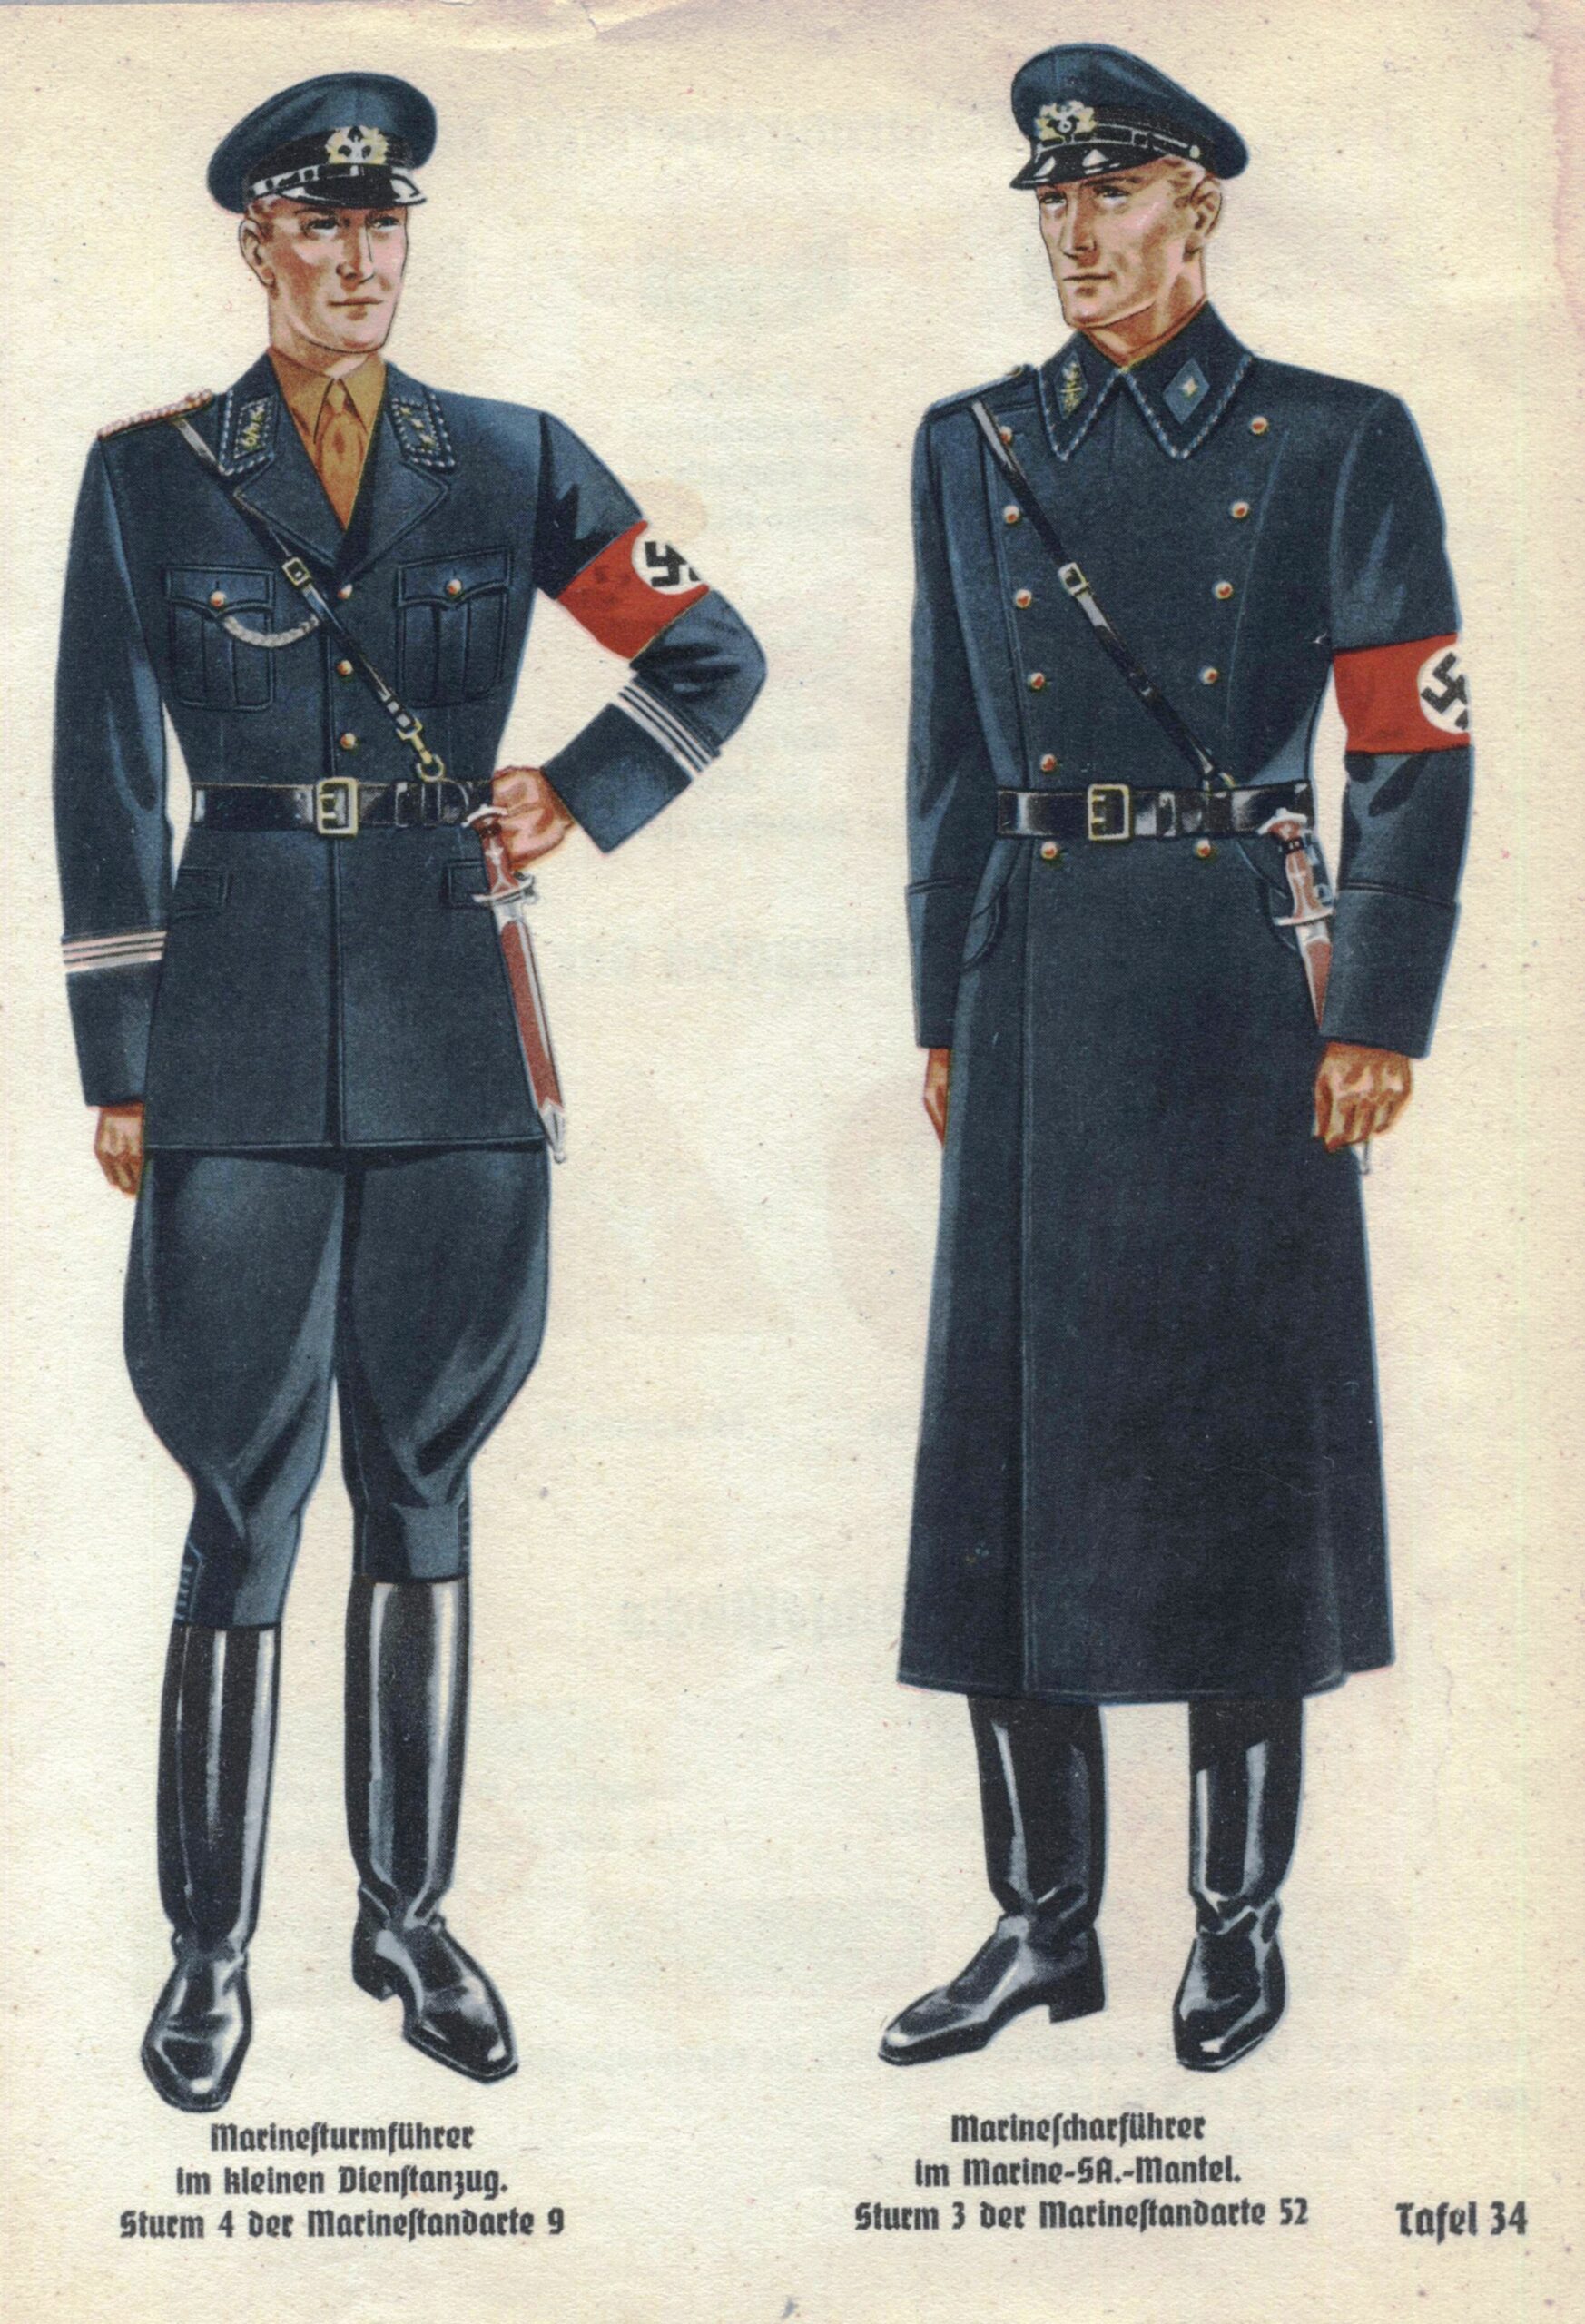 The Power of Cloth: The Non-Uniform Uniformity of the Third Reich